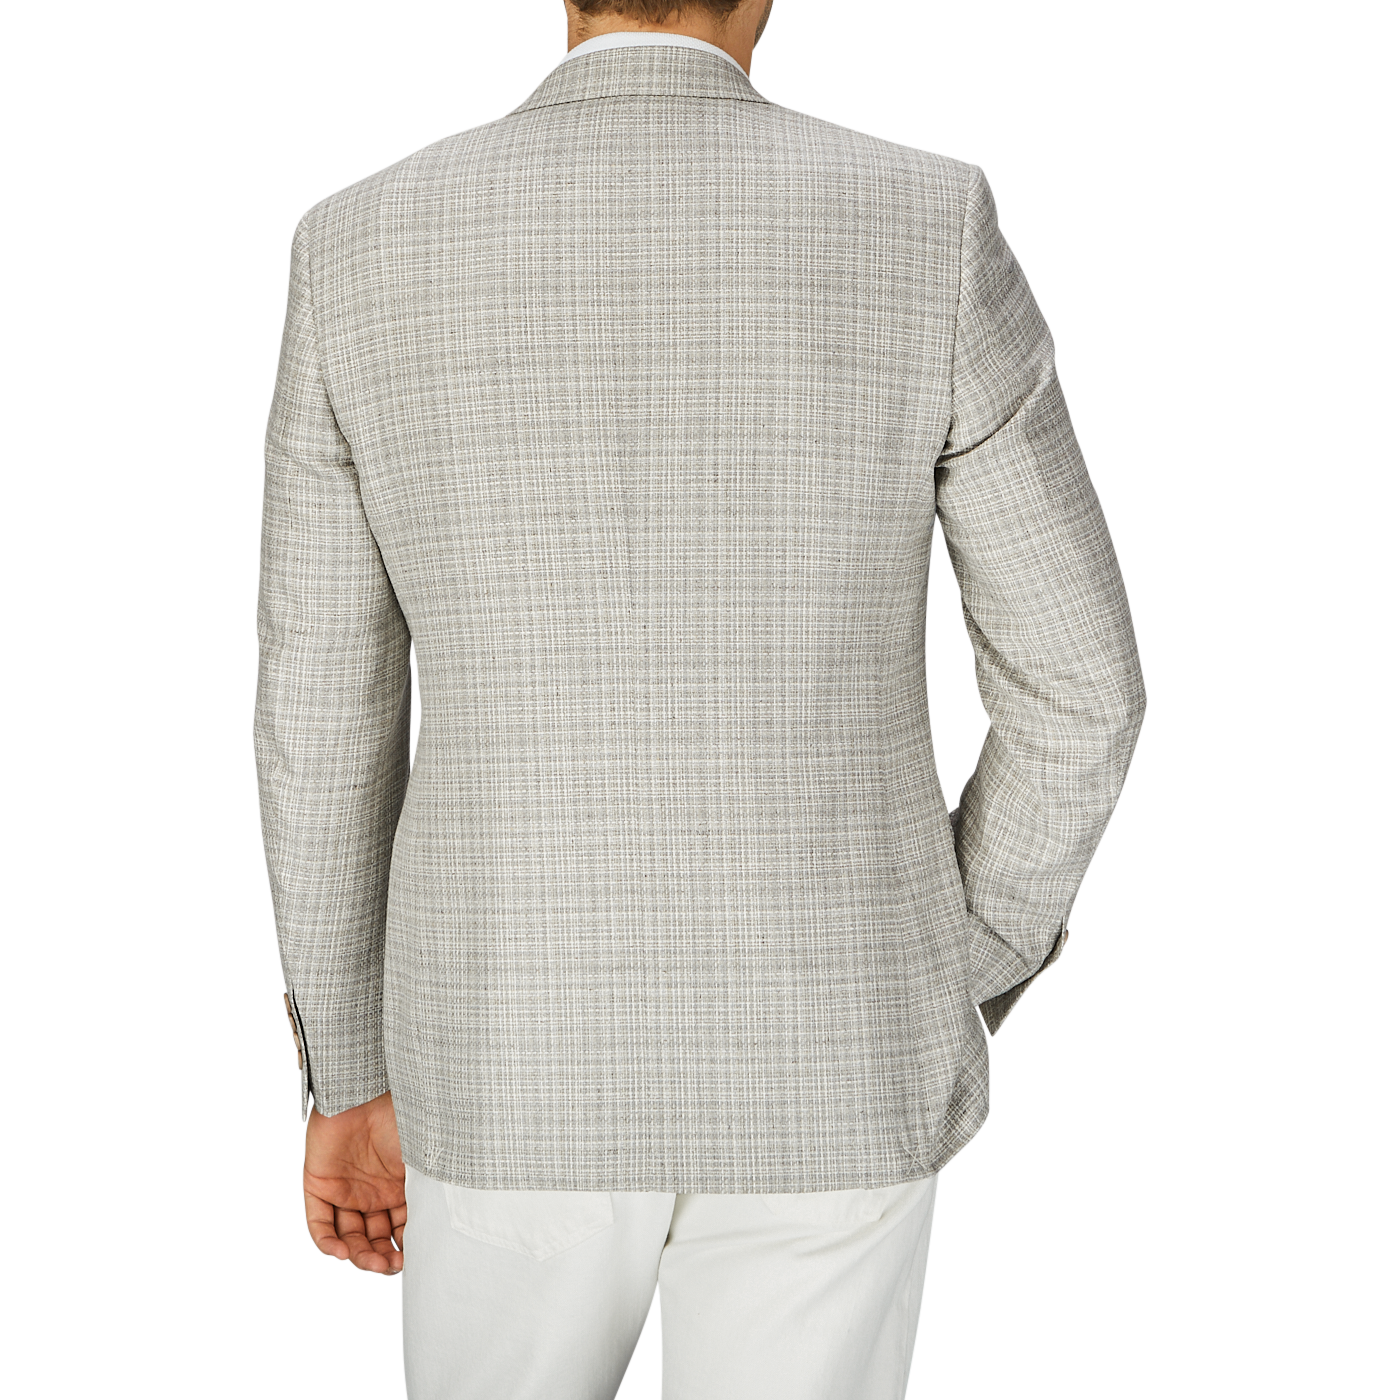 Rear view of a person wearing a Canali Beige Melange Silk Wool Basketweave Blazer with white trousers on a gray background.